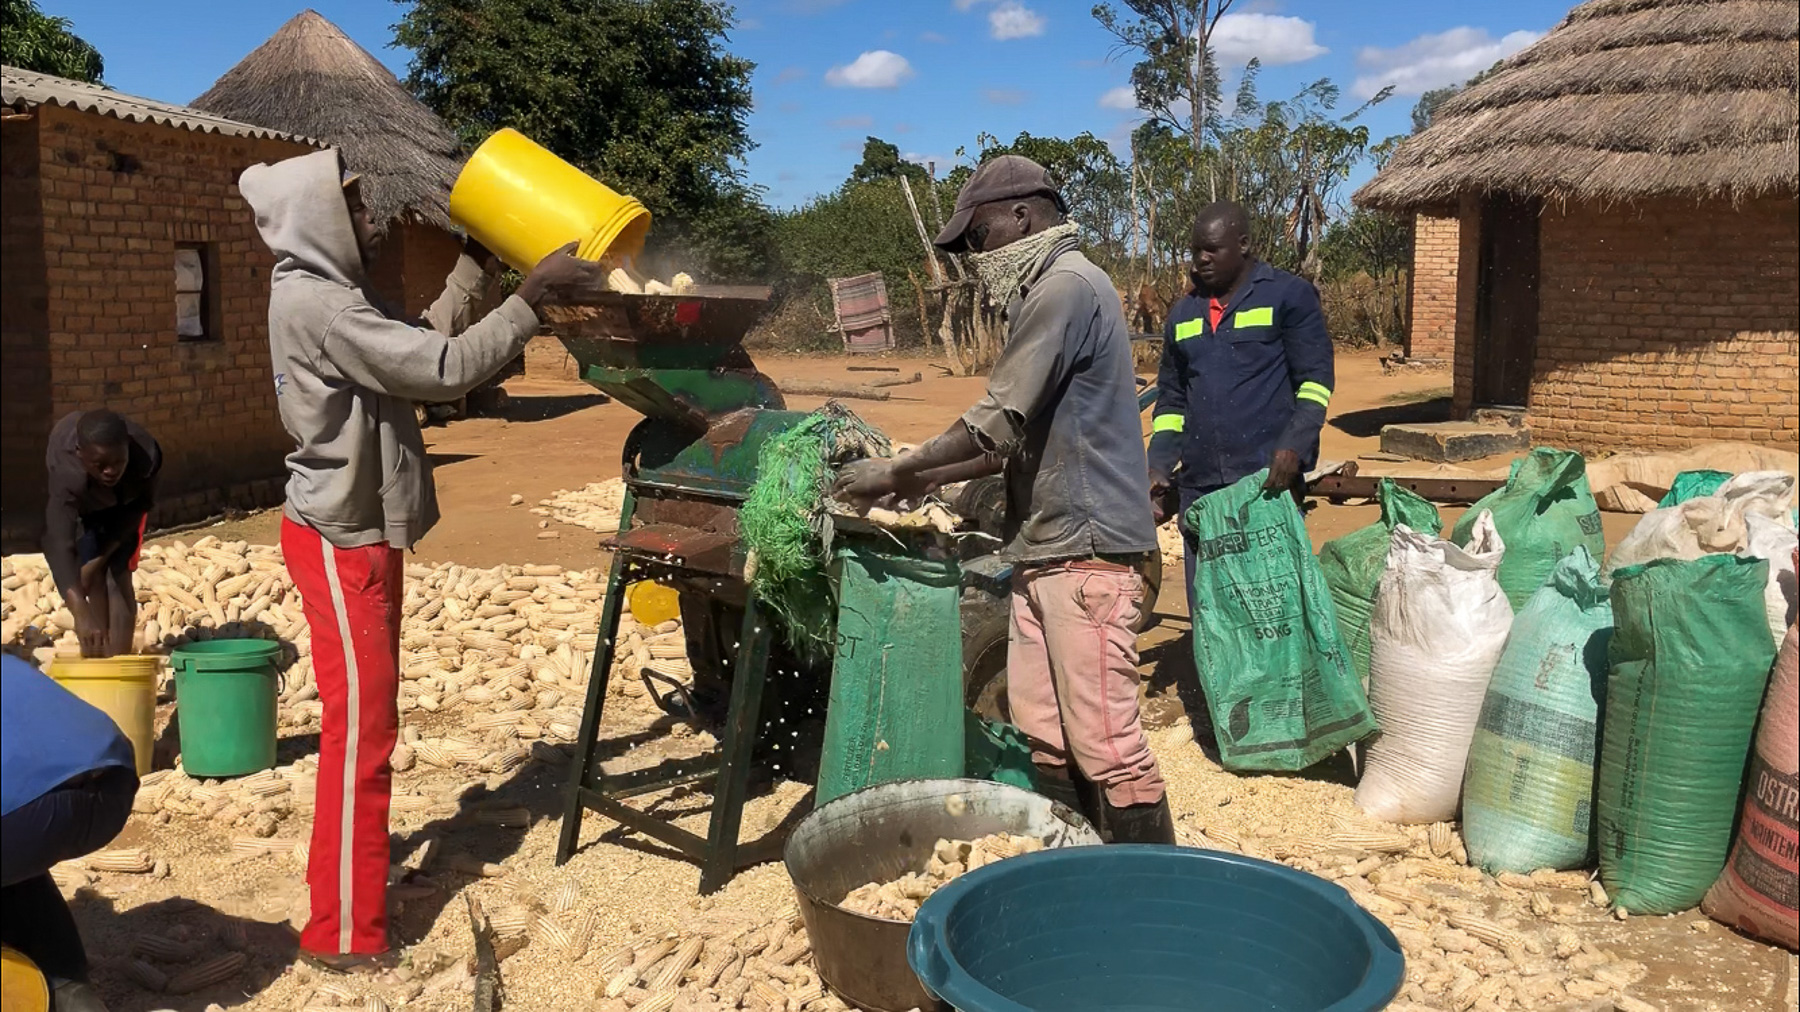 (From left to right) Shepard Kawiz, 24, gathers dried maize cobs into a bucket passing it to his brother Pinnot Karwizi, 26, who pours the maize into the sheller machine by feeding the hopper. The maize falls into the sheller’s barrel where high-speed rotation separates the grain from the cob. As the bare shafts are propelled out one side, Masimba Mawire, 30, is there to catch and dispose of them. Meanwhile, Gift Chawara, 28, is making sure a bag is securely hooked to the machine to collect the maize grain. (Photo: Matthew O’Leary/CIMMYT)